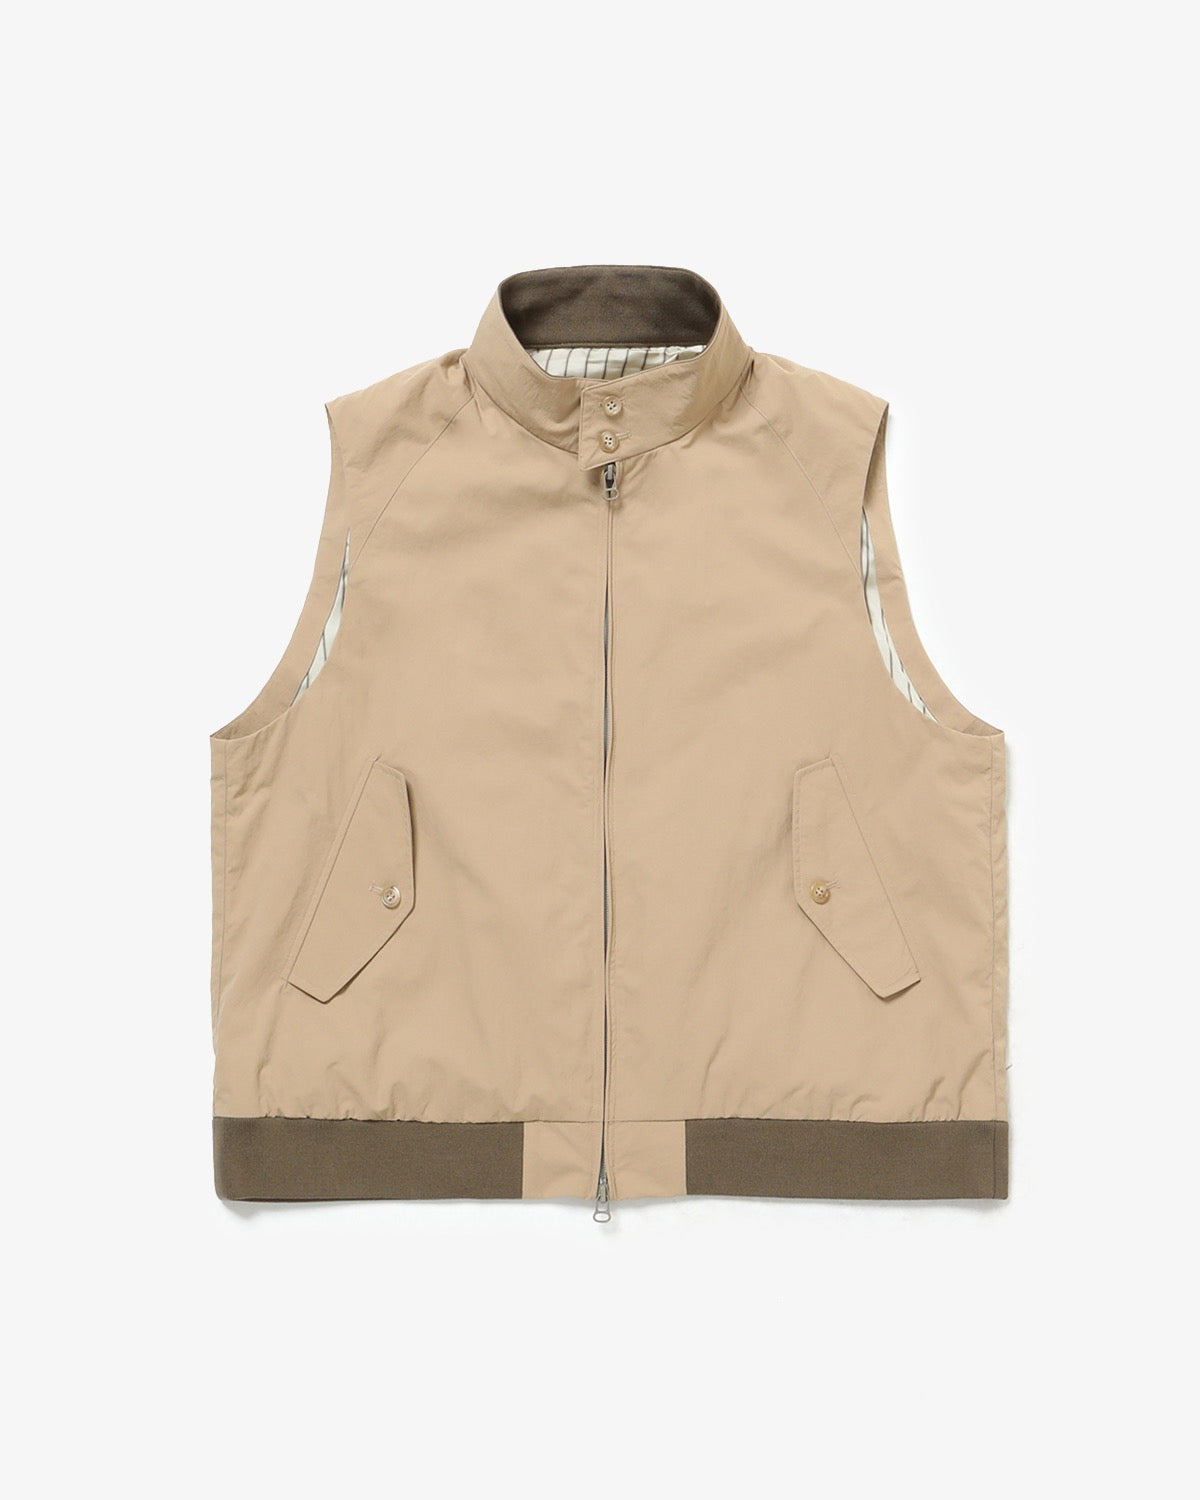 UNLIKELY ANYTHING GOLF VEST